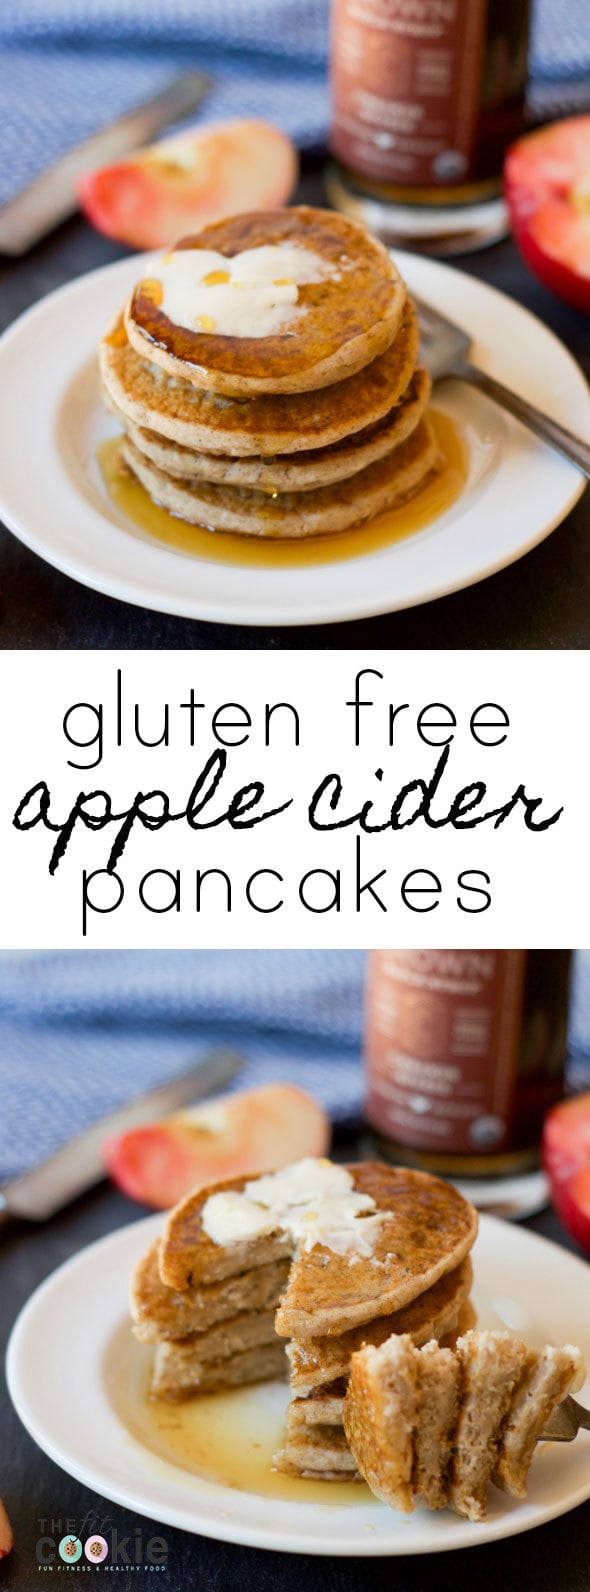 Craving some apple recipes this fall? Make some easy and quick Gluten Free Apple Cider Pancakes for breakfast, they're nut-free and vegan too! - @TheFitCookie #vegan #glutenfree